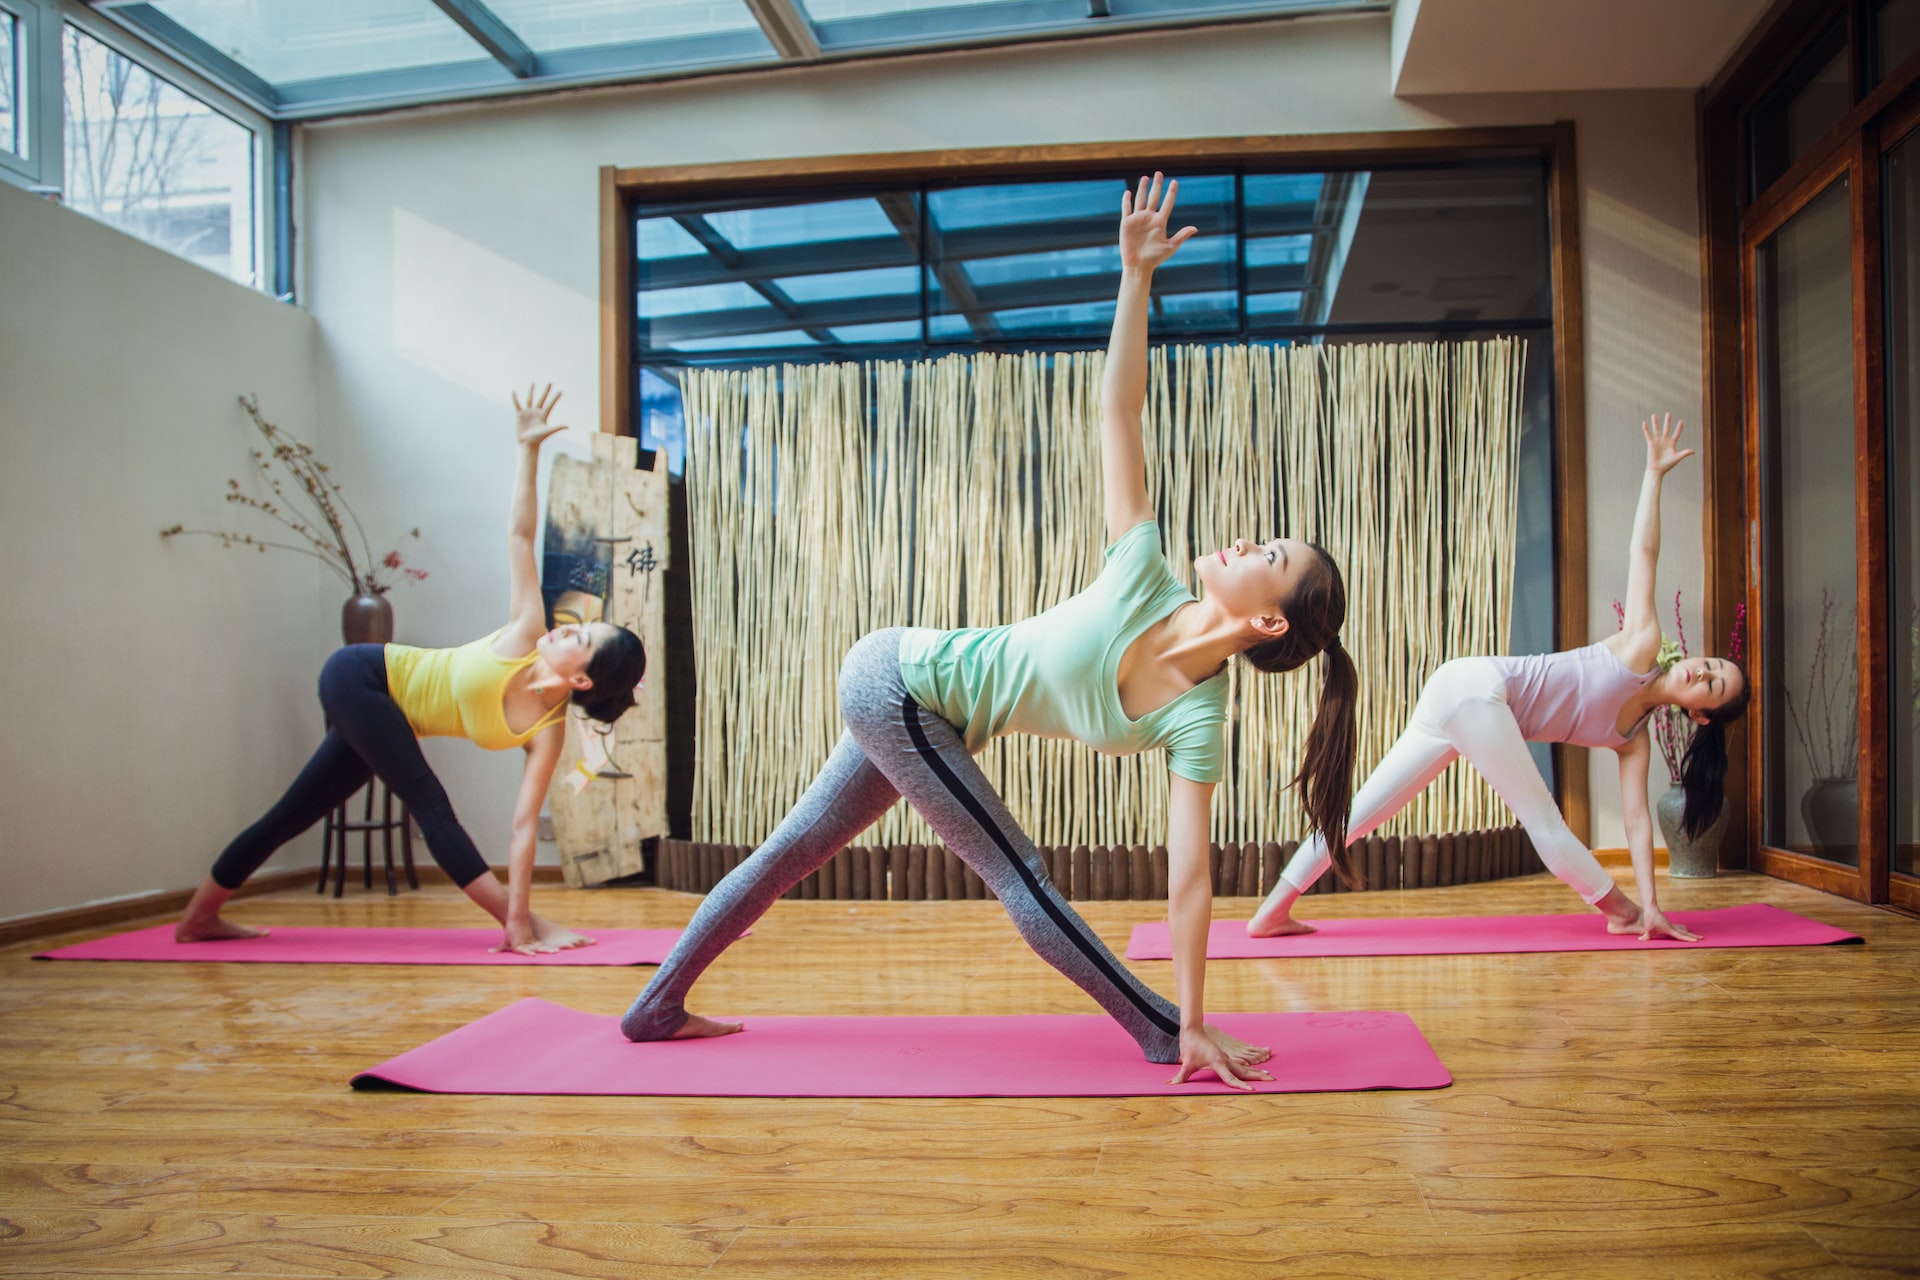 Hawaii’s ProYoga is listing the Best Yoga Studios